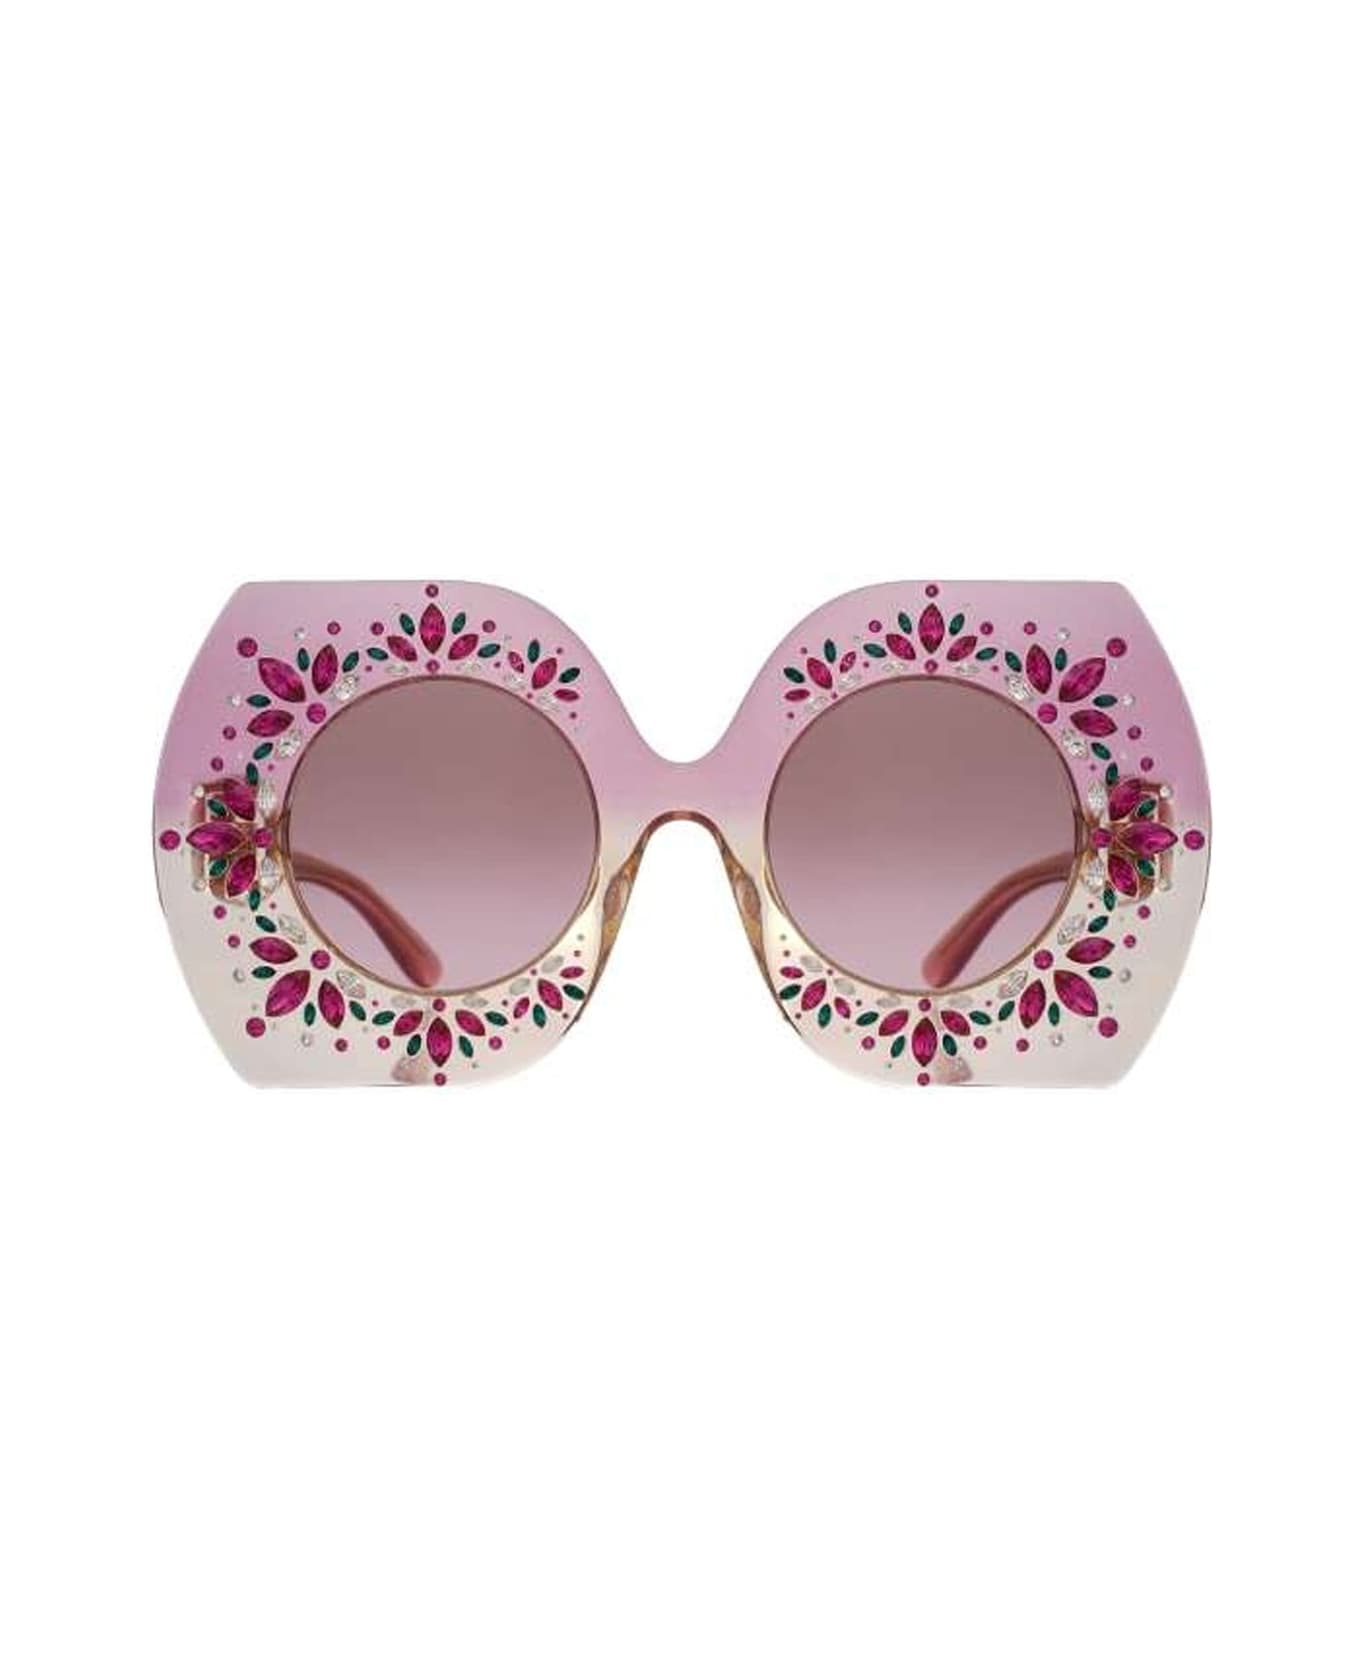 Dolce & Gabbana Limited Edition Crystal Sunglasses - Pink